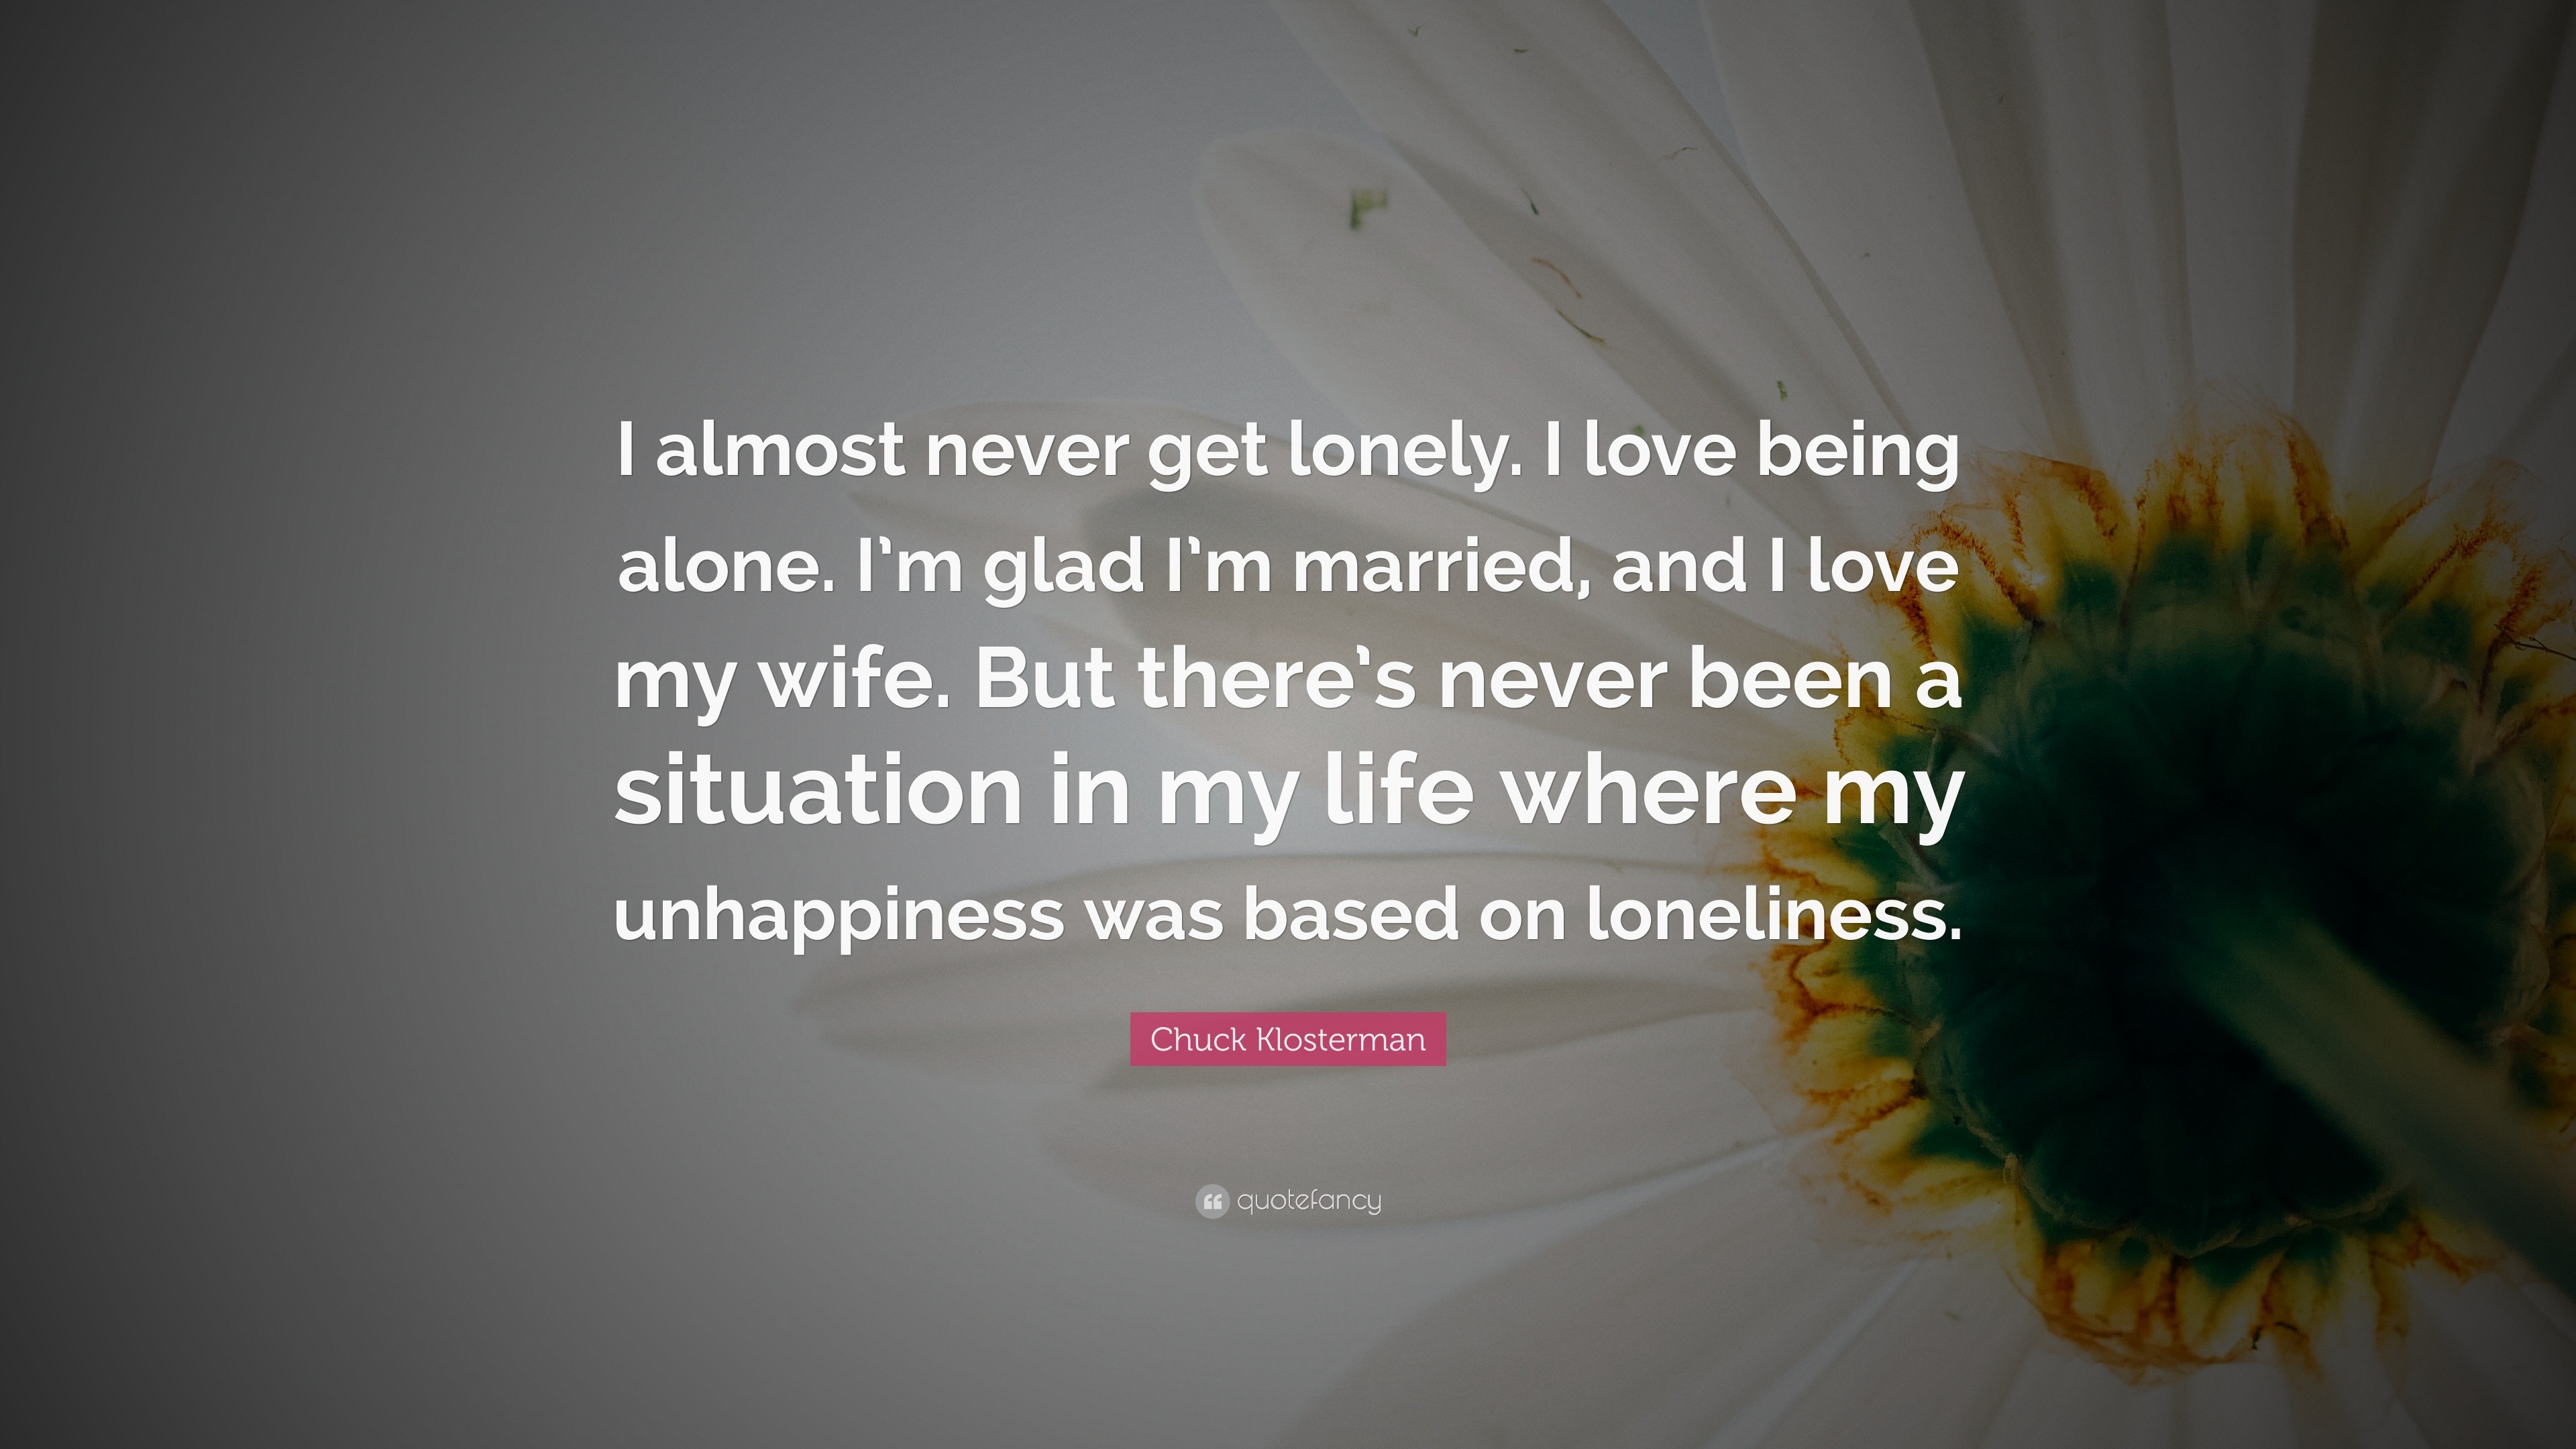 Chuck Klosterman Quote “I almost never lonely I love being alone